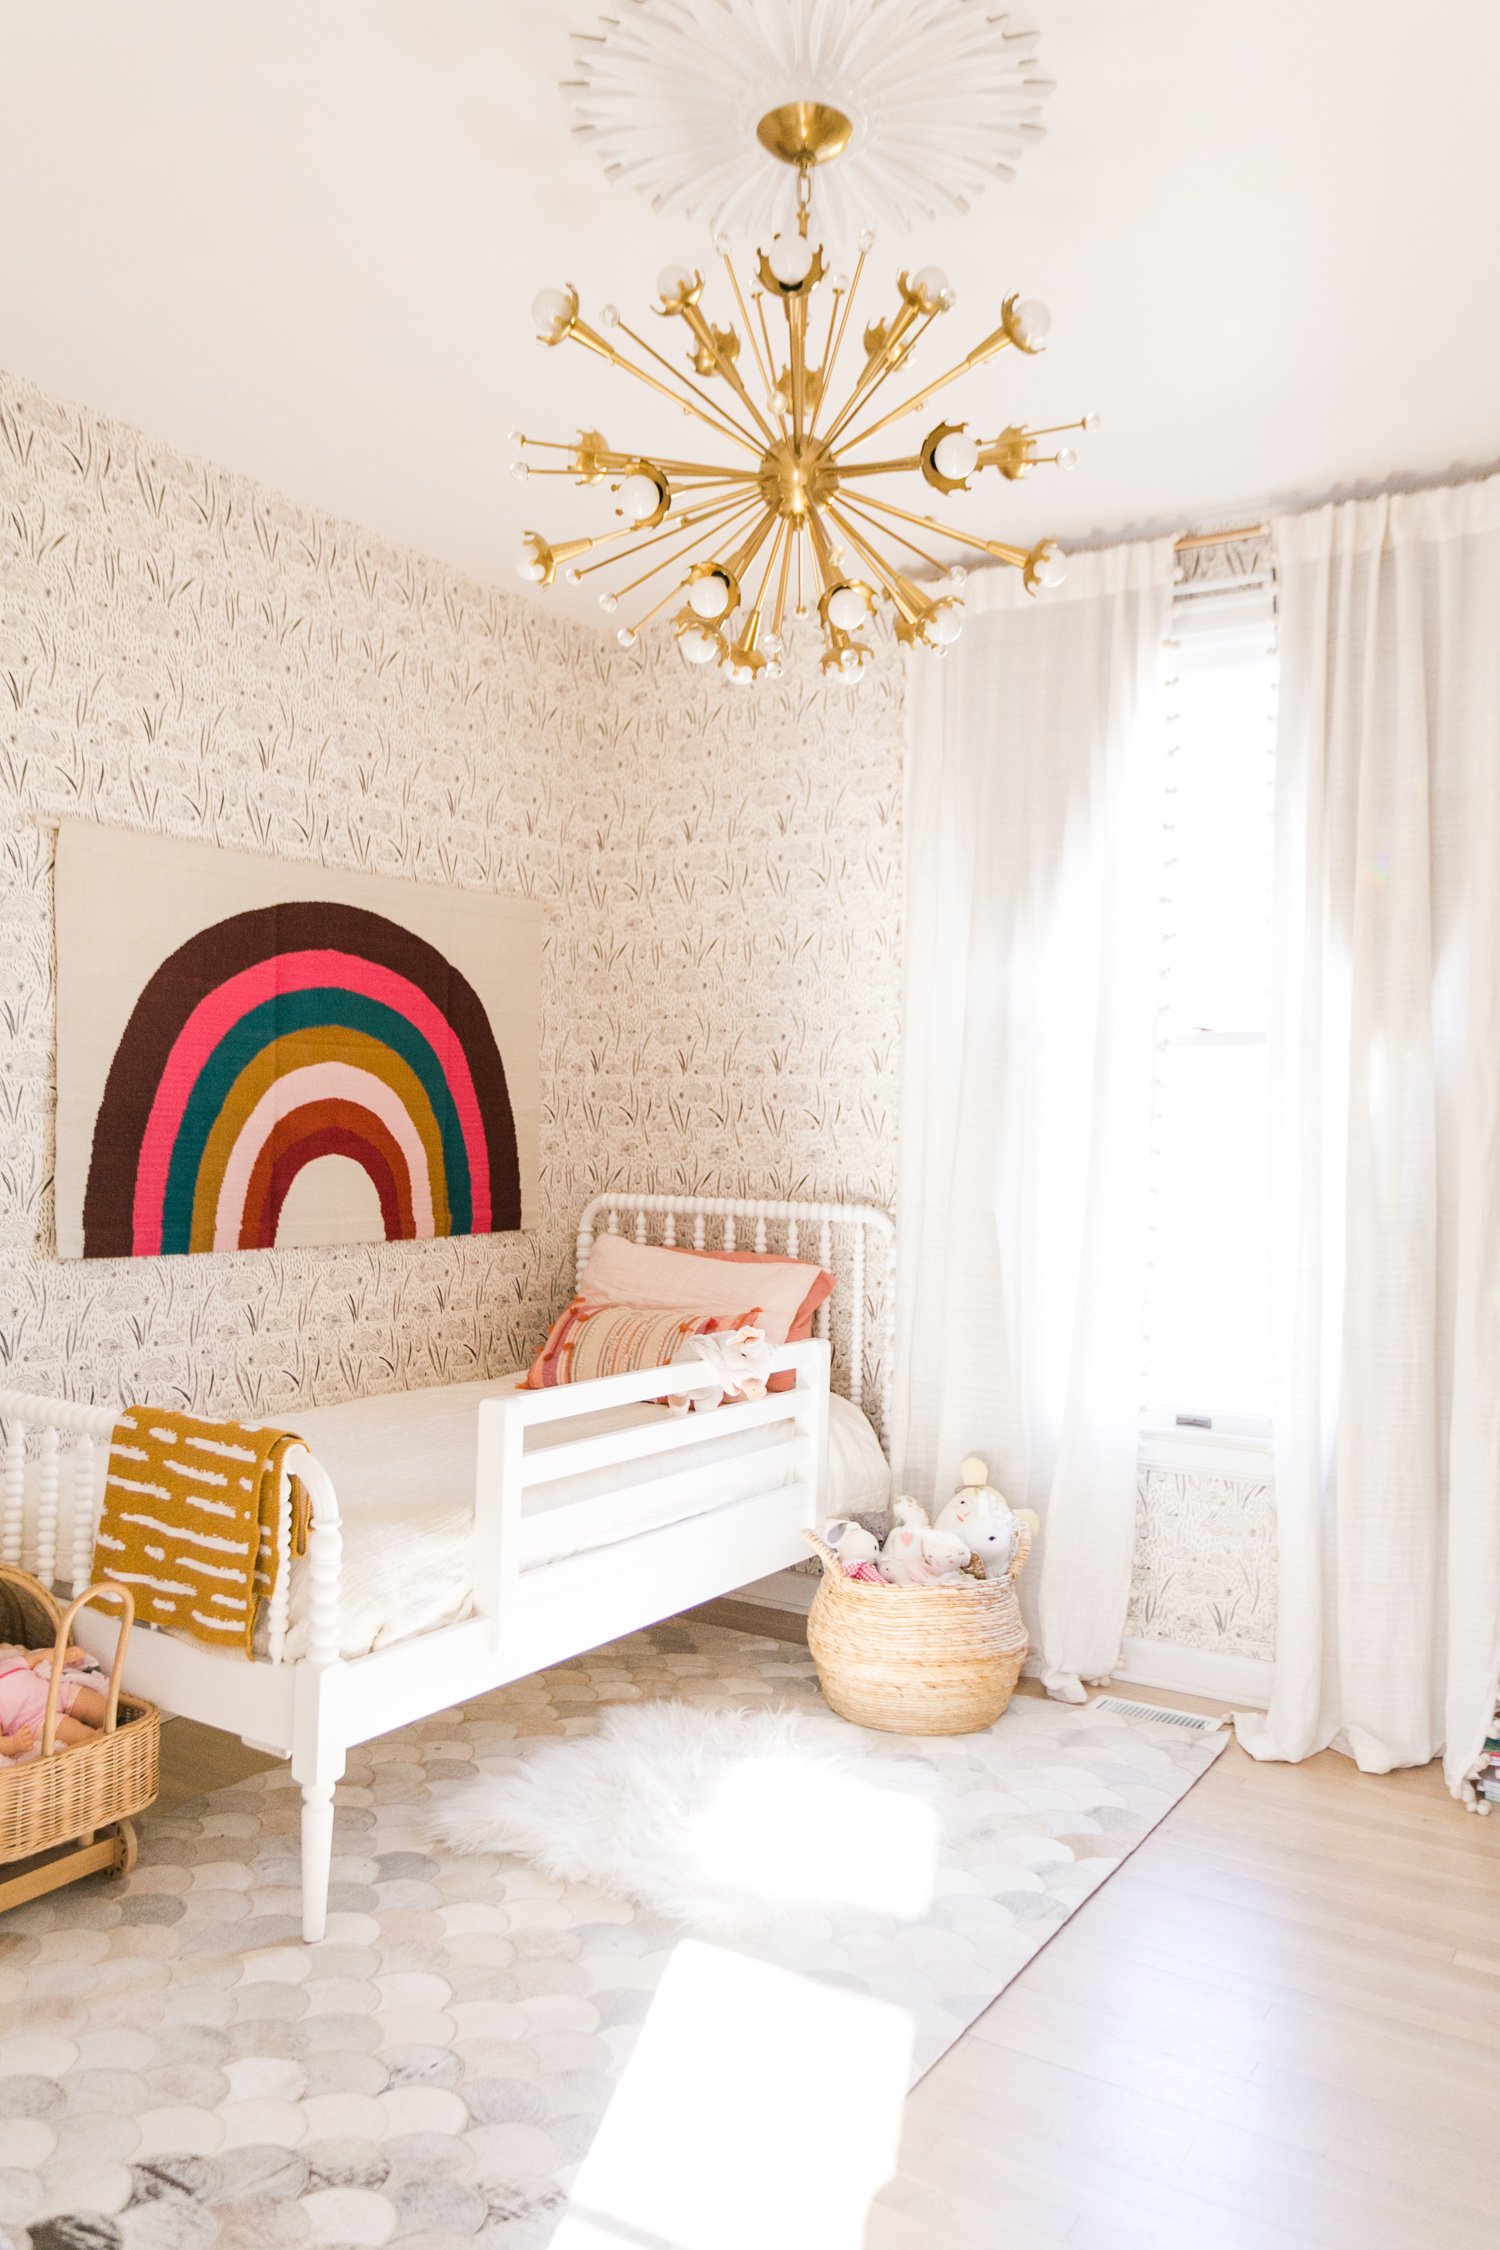 Wallpaper-in-a-toddlers-bedroom-96128